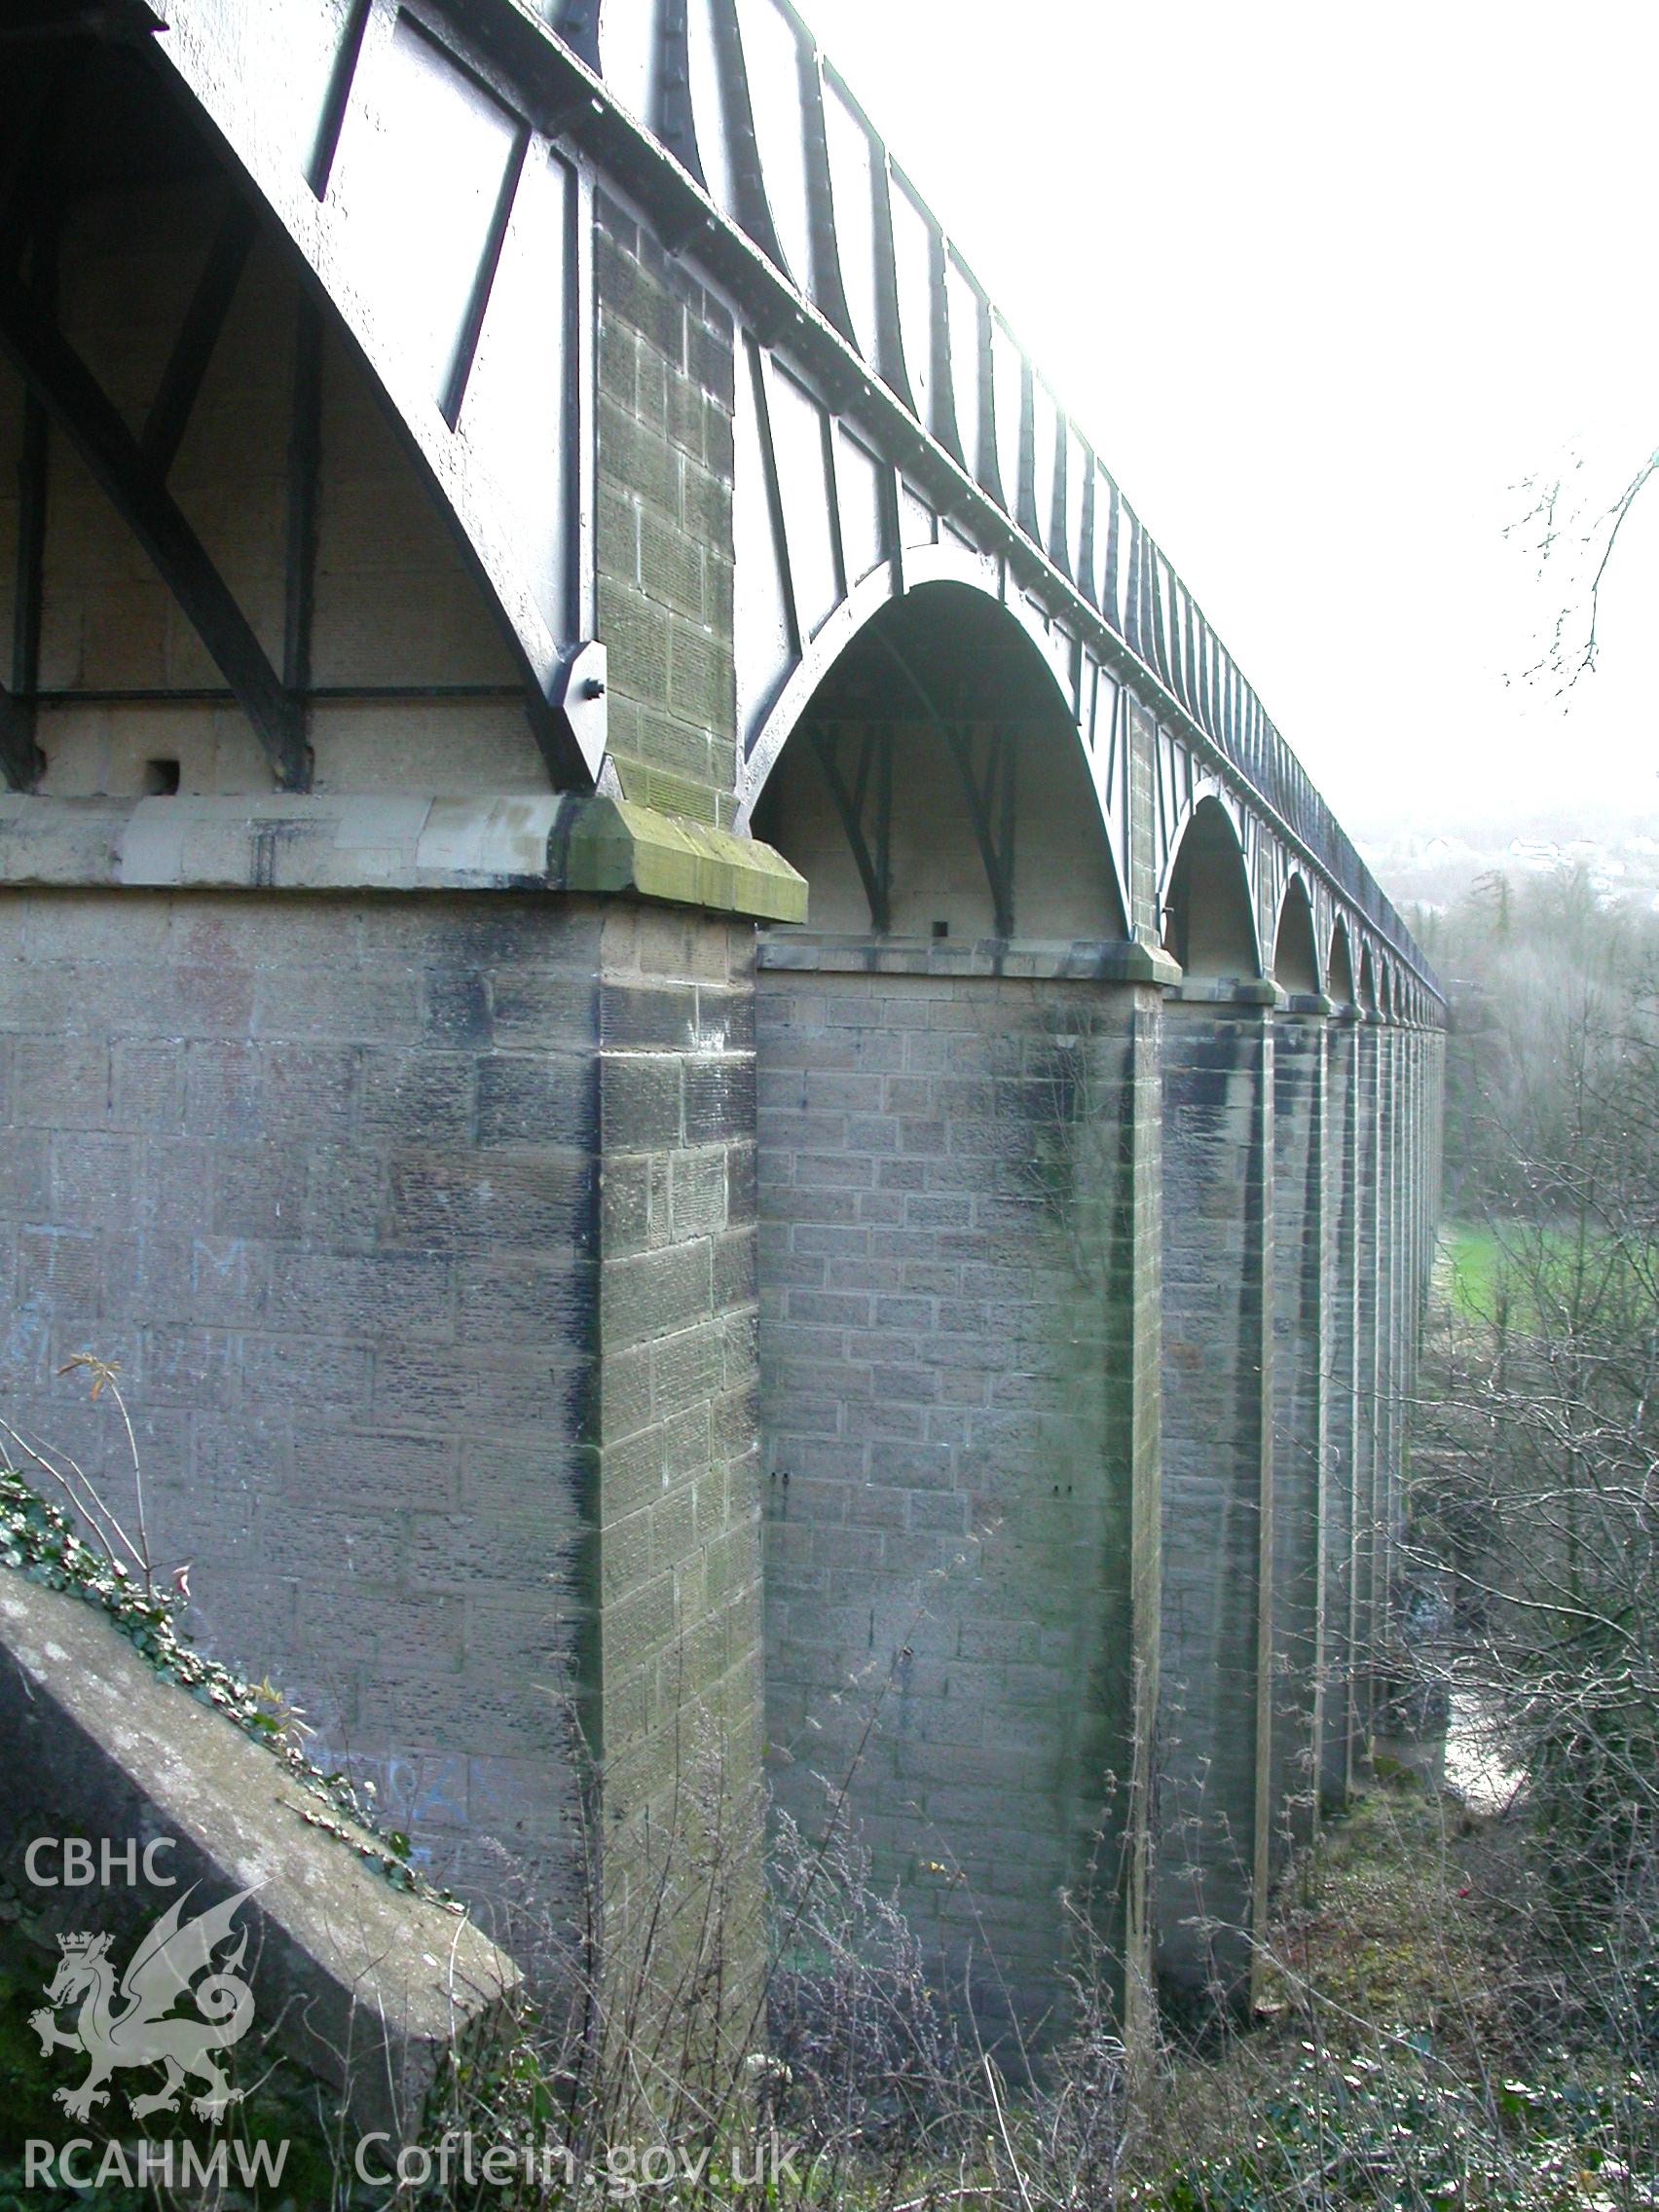 Aqueduct cast-iron spans from the north-west.